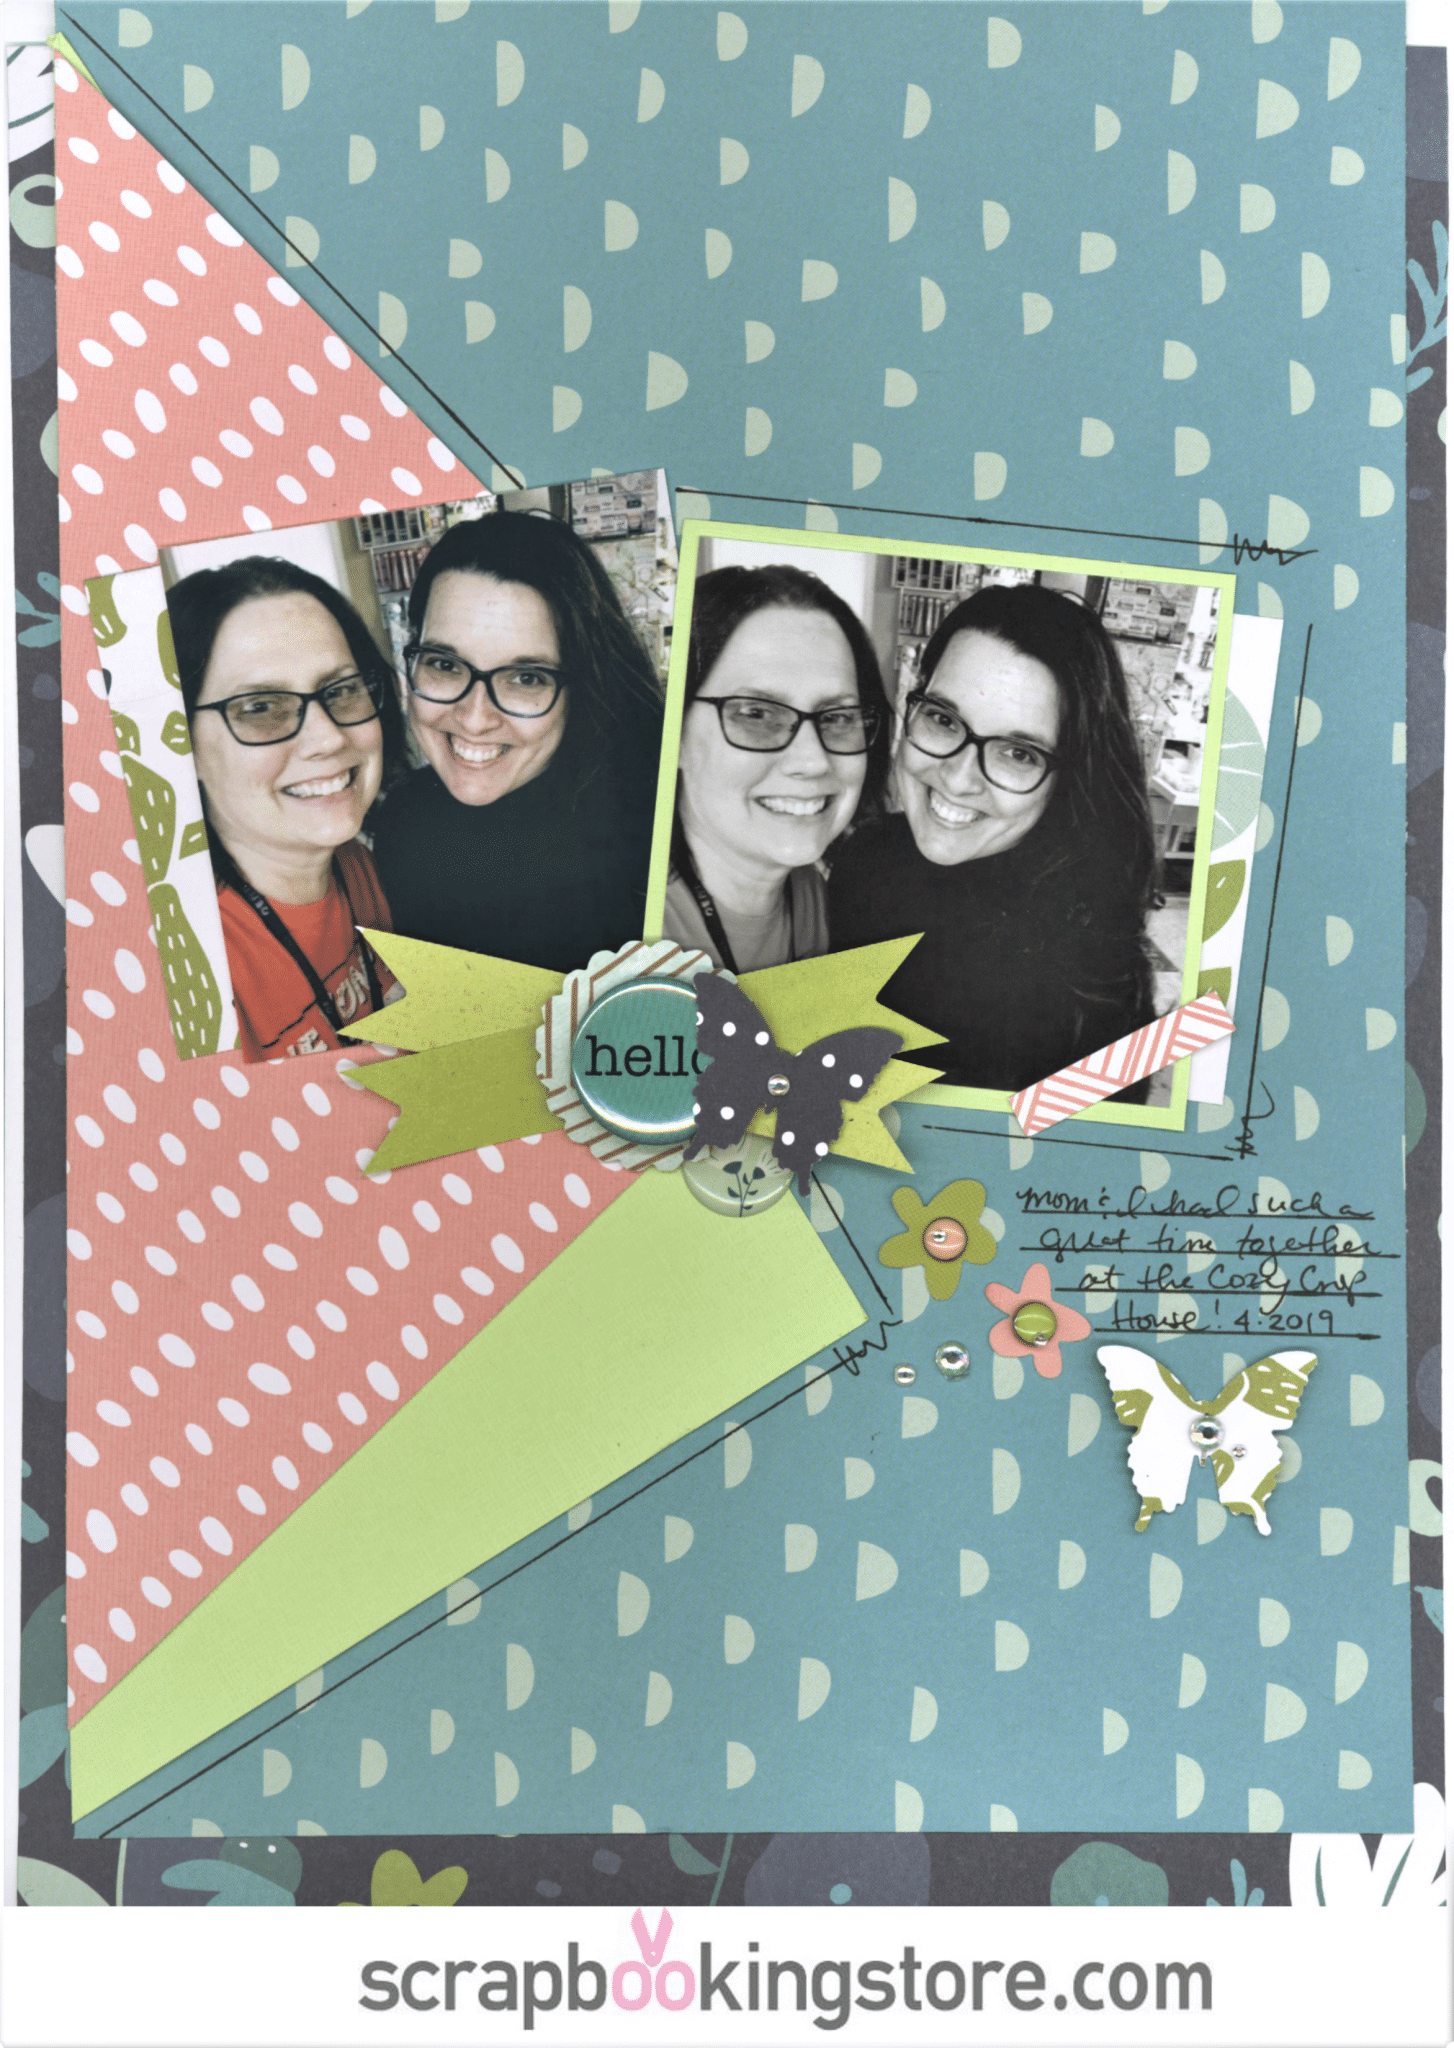 ScrapbookingStore May 2019 kit - Nicole used all crafting materials from our May 2019 monthly kit called "Happy Days" collection by My Mind’s Eye, which also includes Dear Lizzy “Oh Hello” from the Lovely Day collection and Maggie Holmes “Summertime” from the Carousel collection